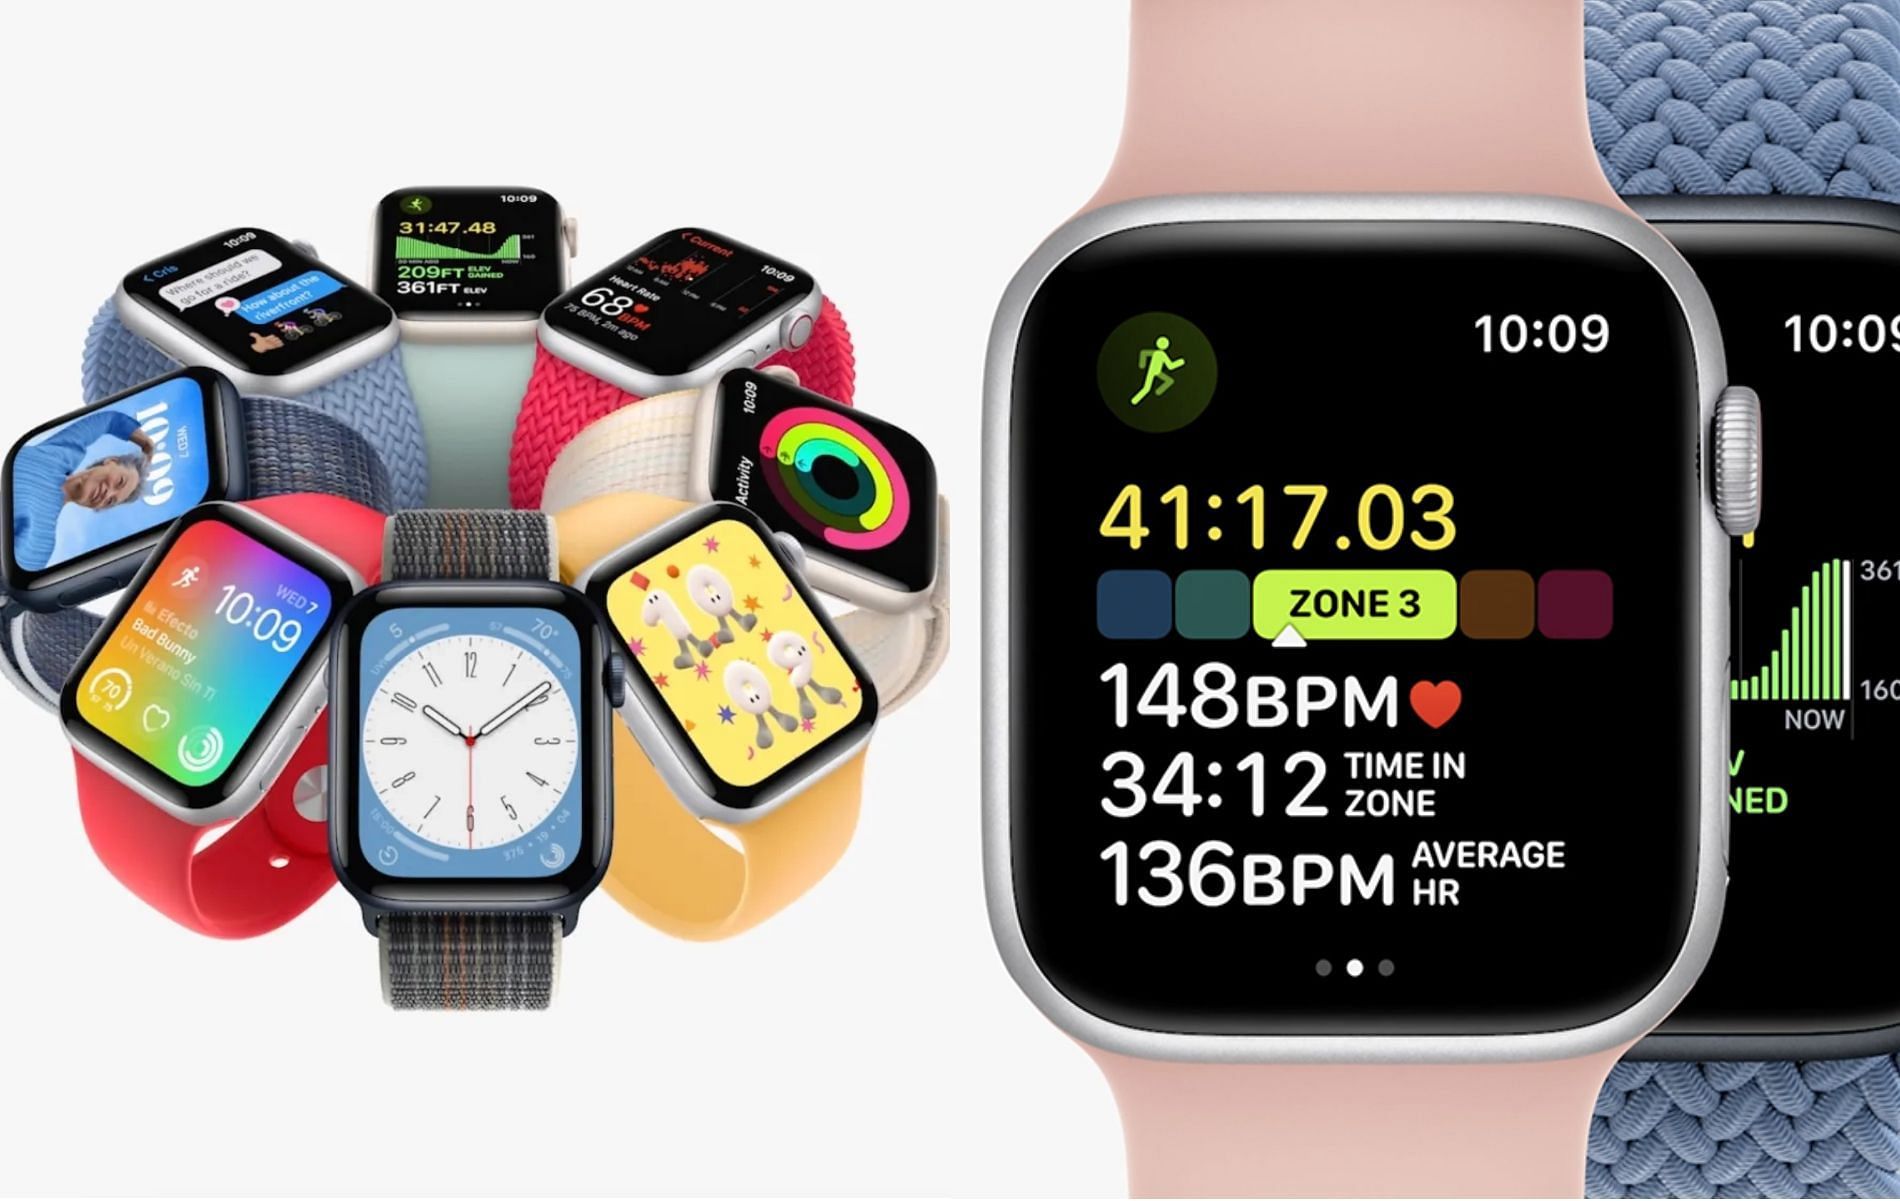 Fans of the original Apple Watch, rejoice - a new era is here (Images via Apple)